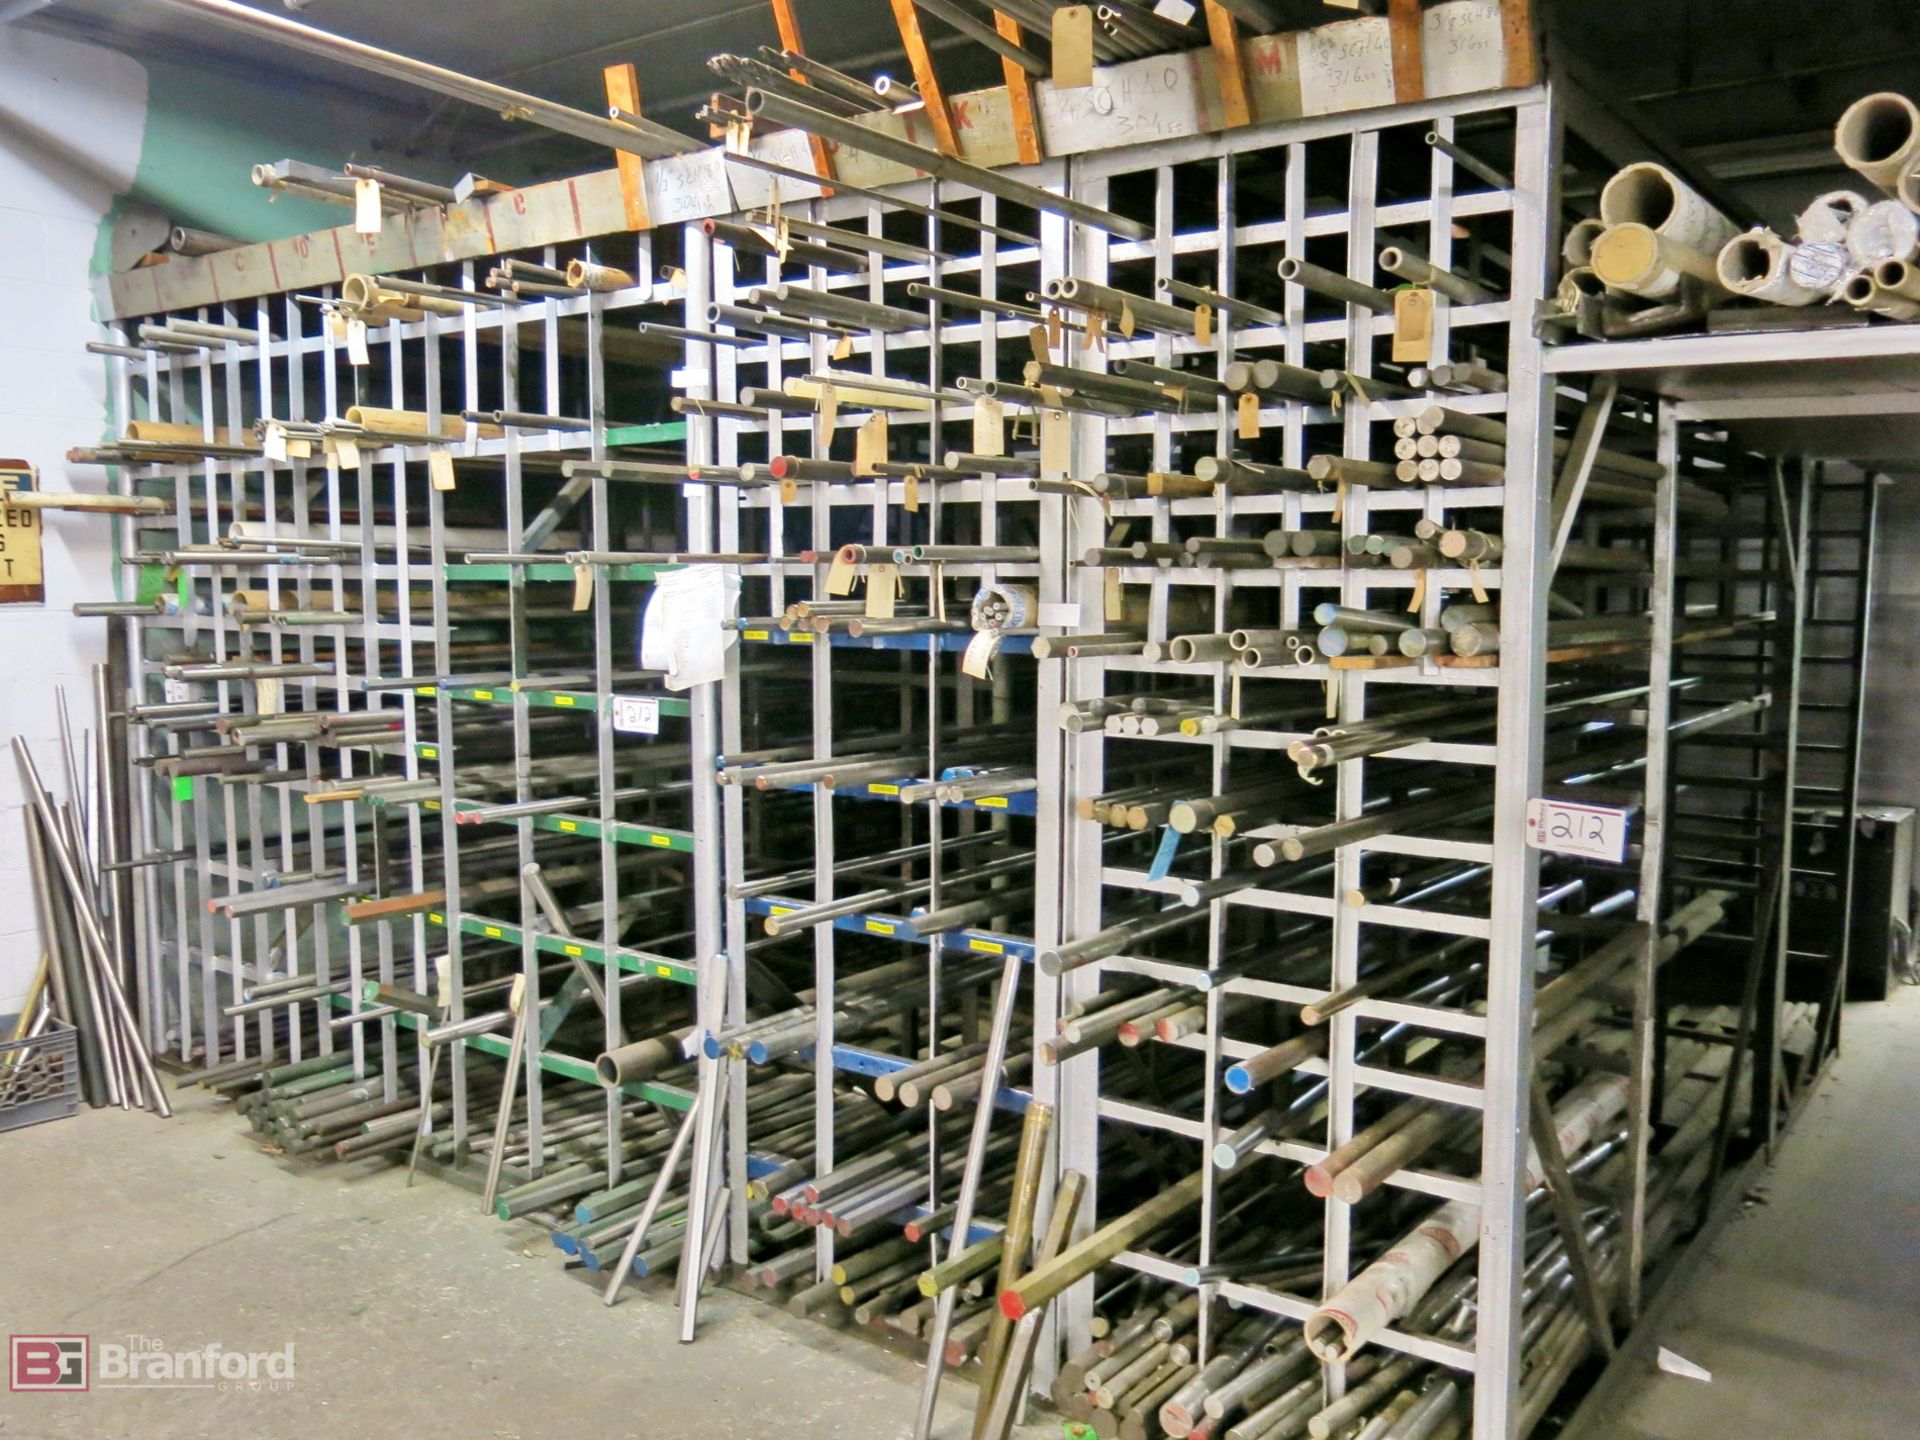 Approx. 15' wide x 15' long x 8' tall raw material rack w/ raw material